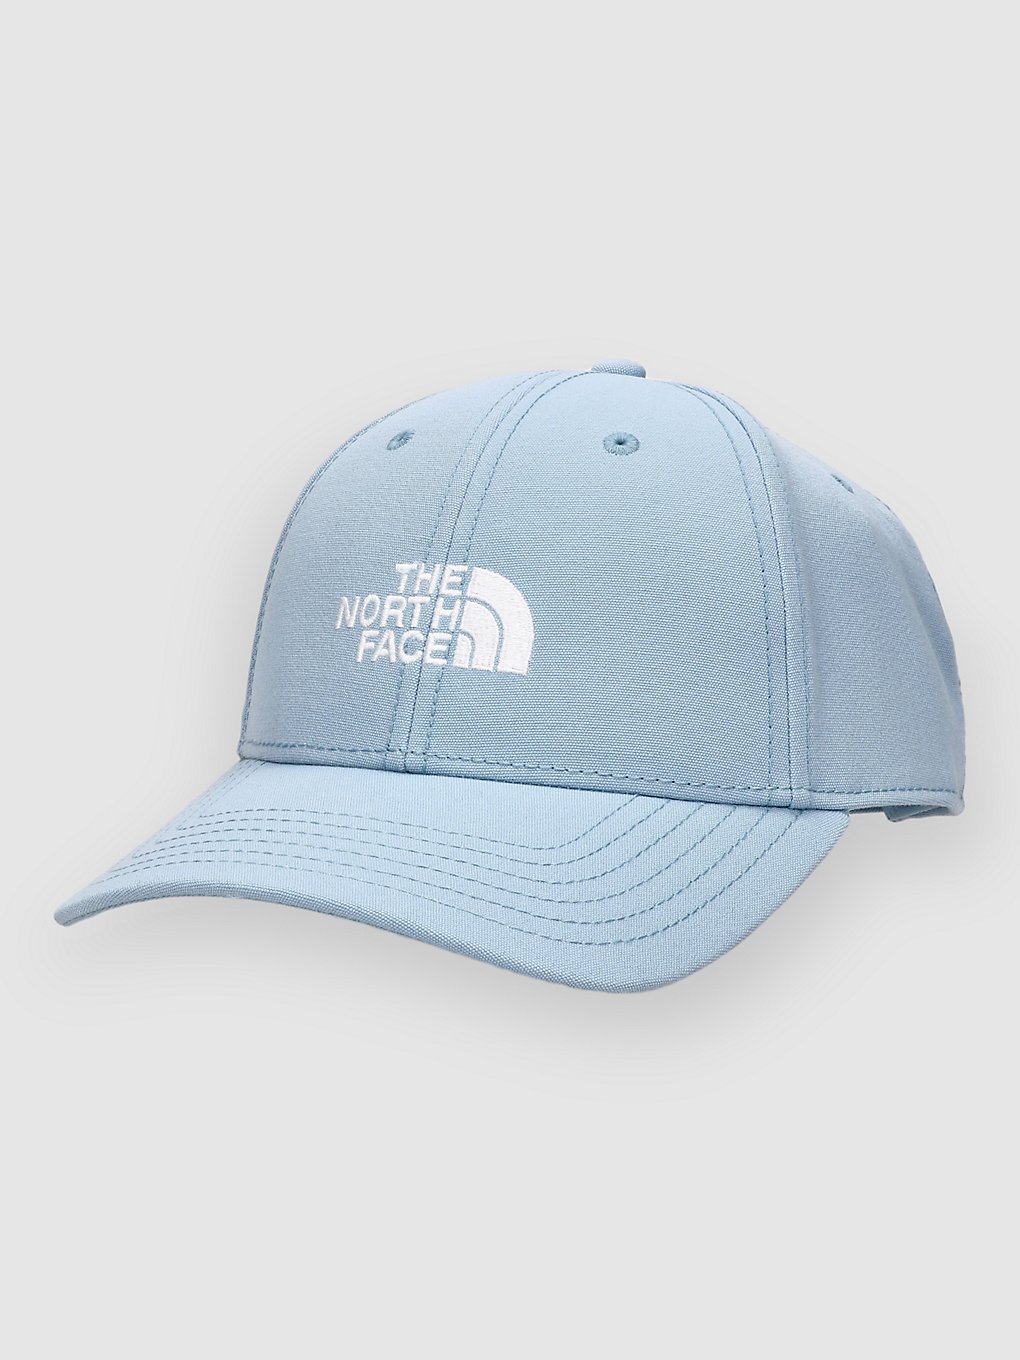 THE NORTH FACE Recycled 66 Classic Cap steel blue kaufen